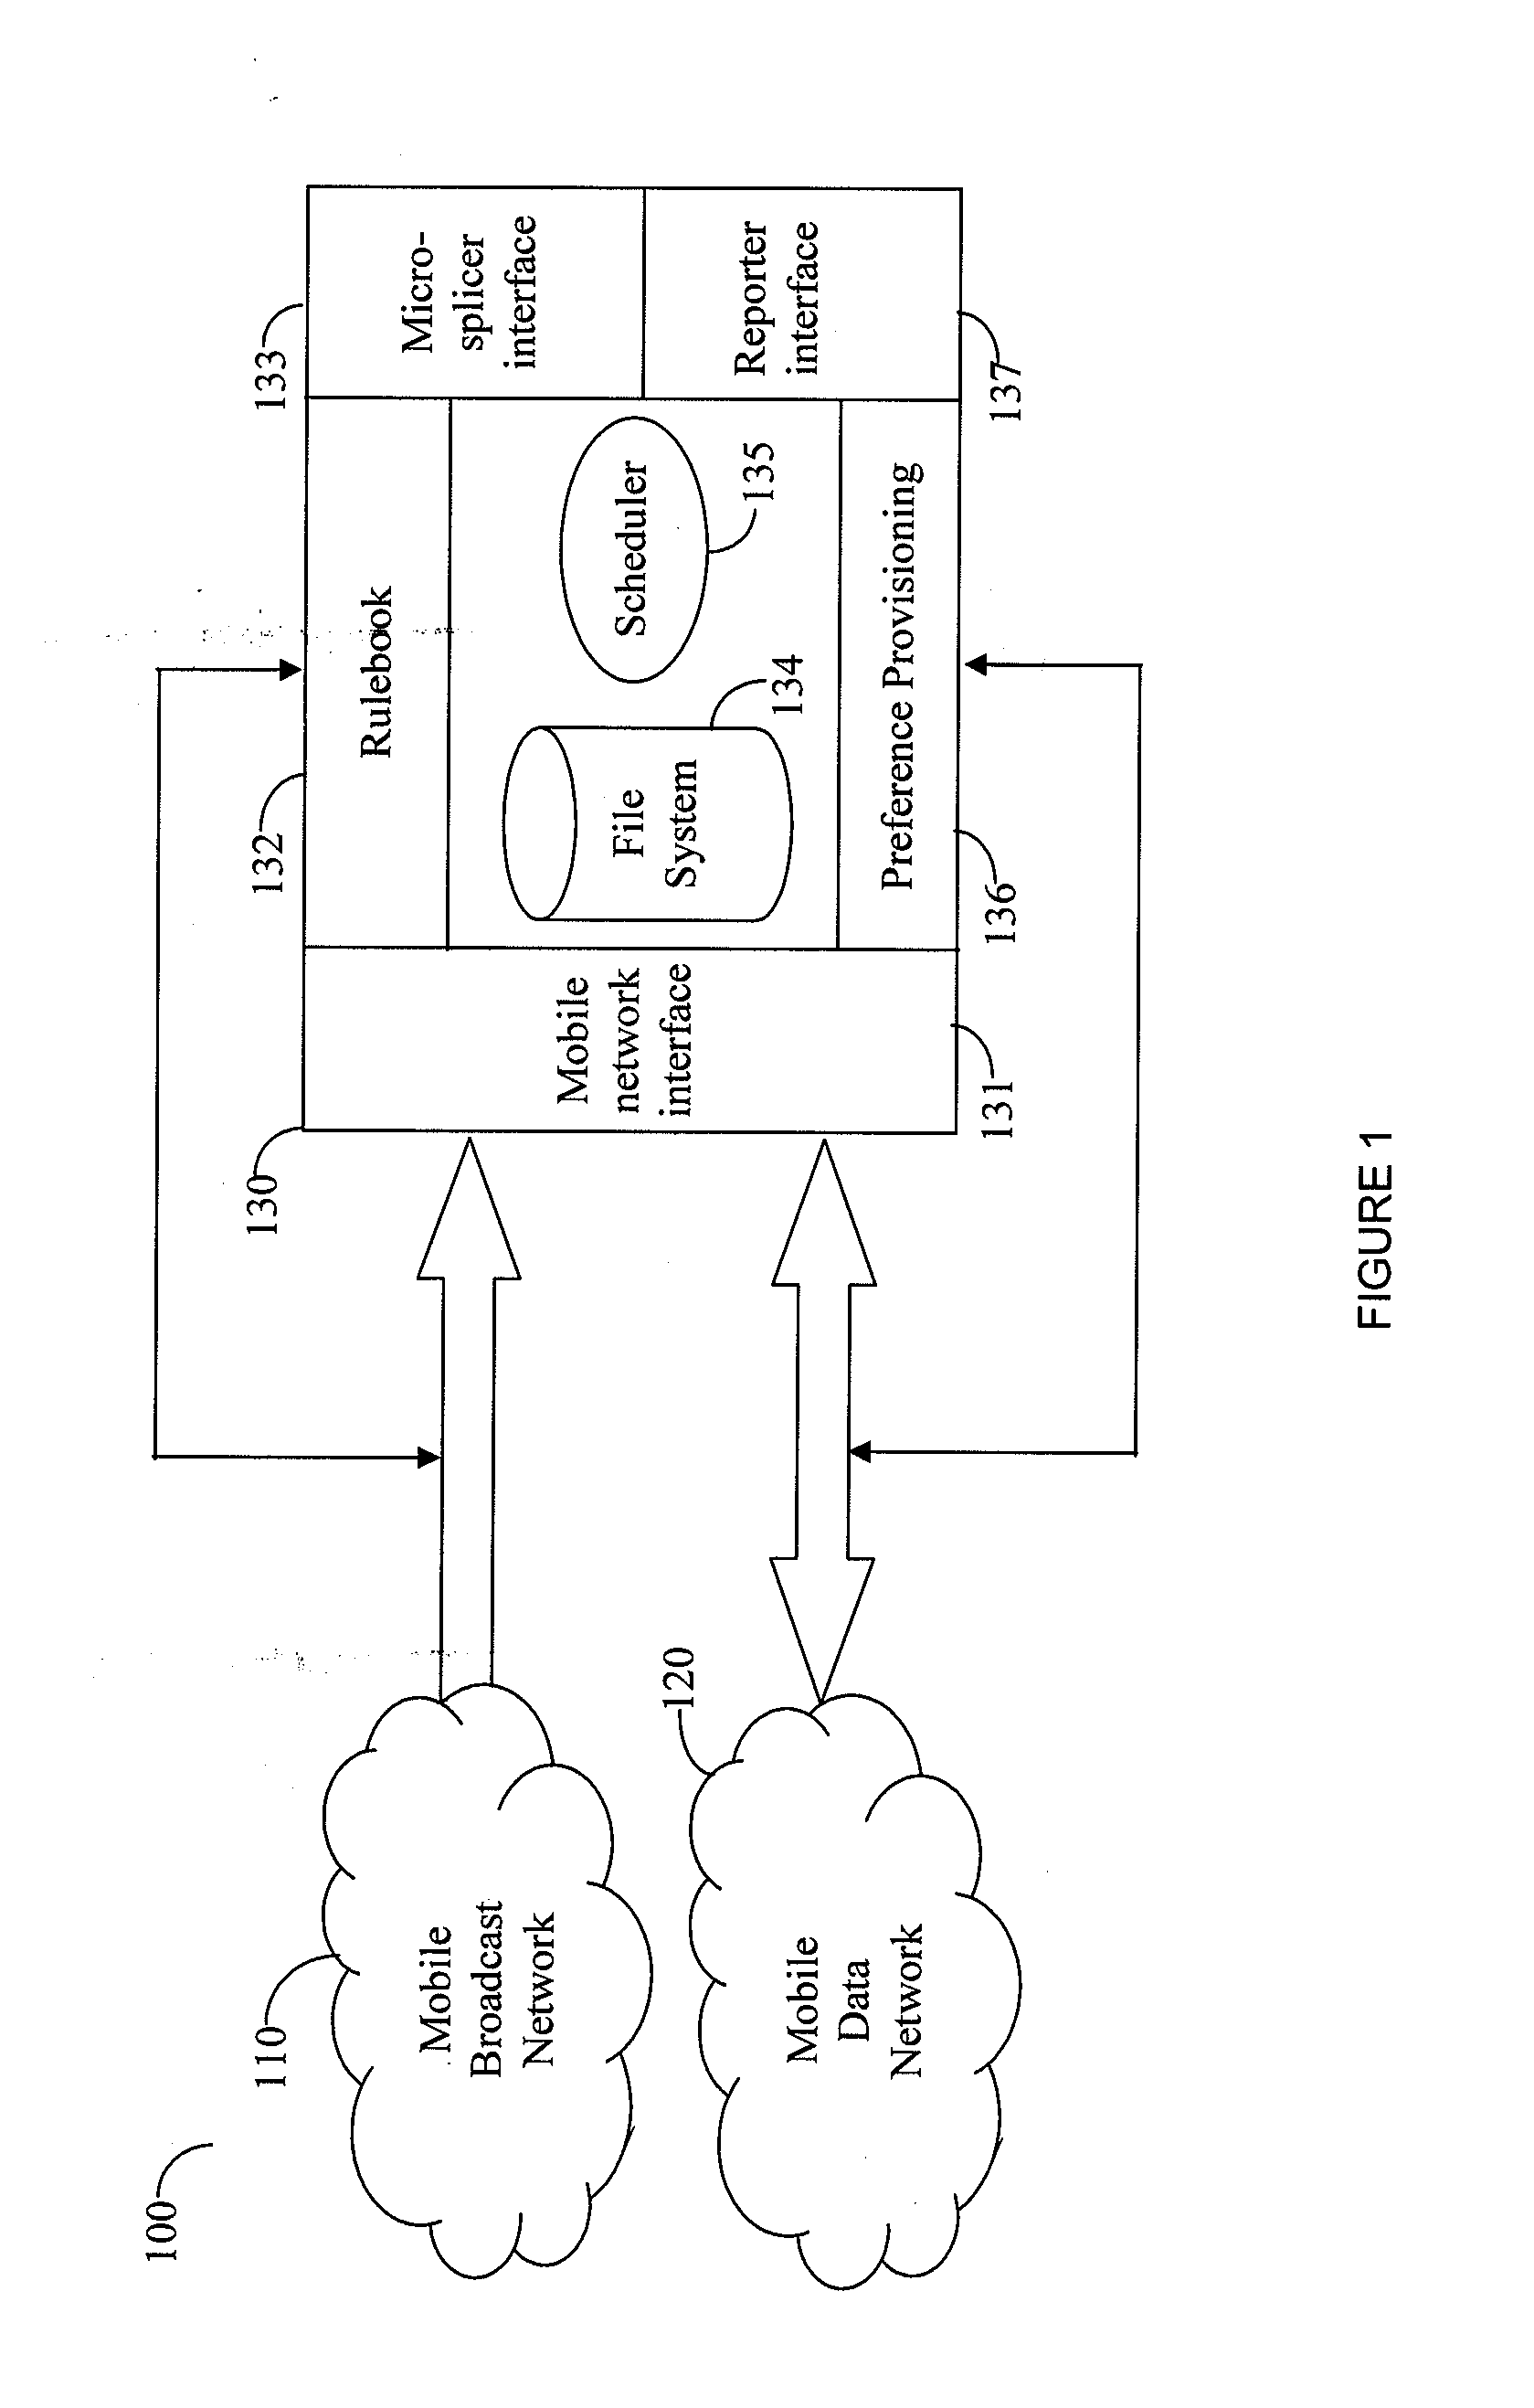 Method and Apparatus for Alternate Content Scheduling on Mobile Devices